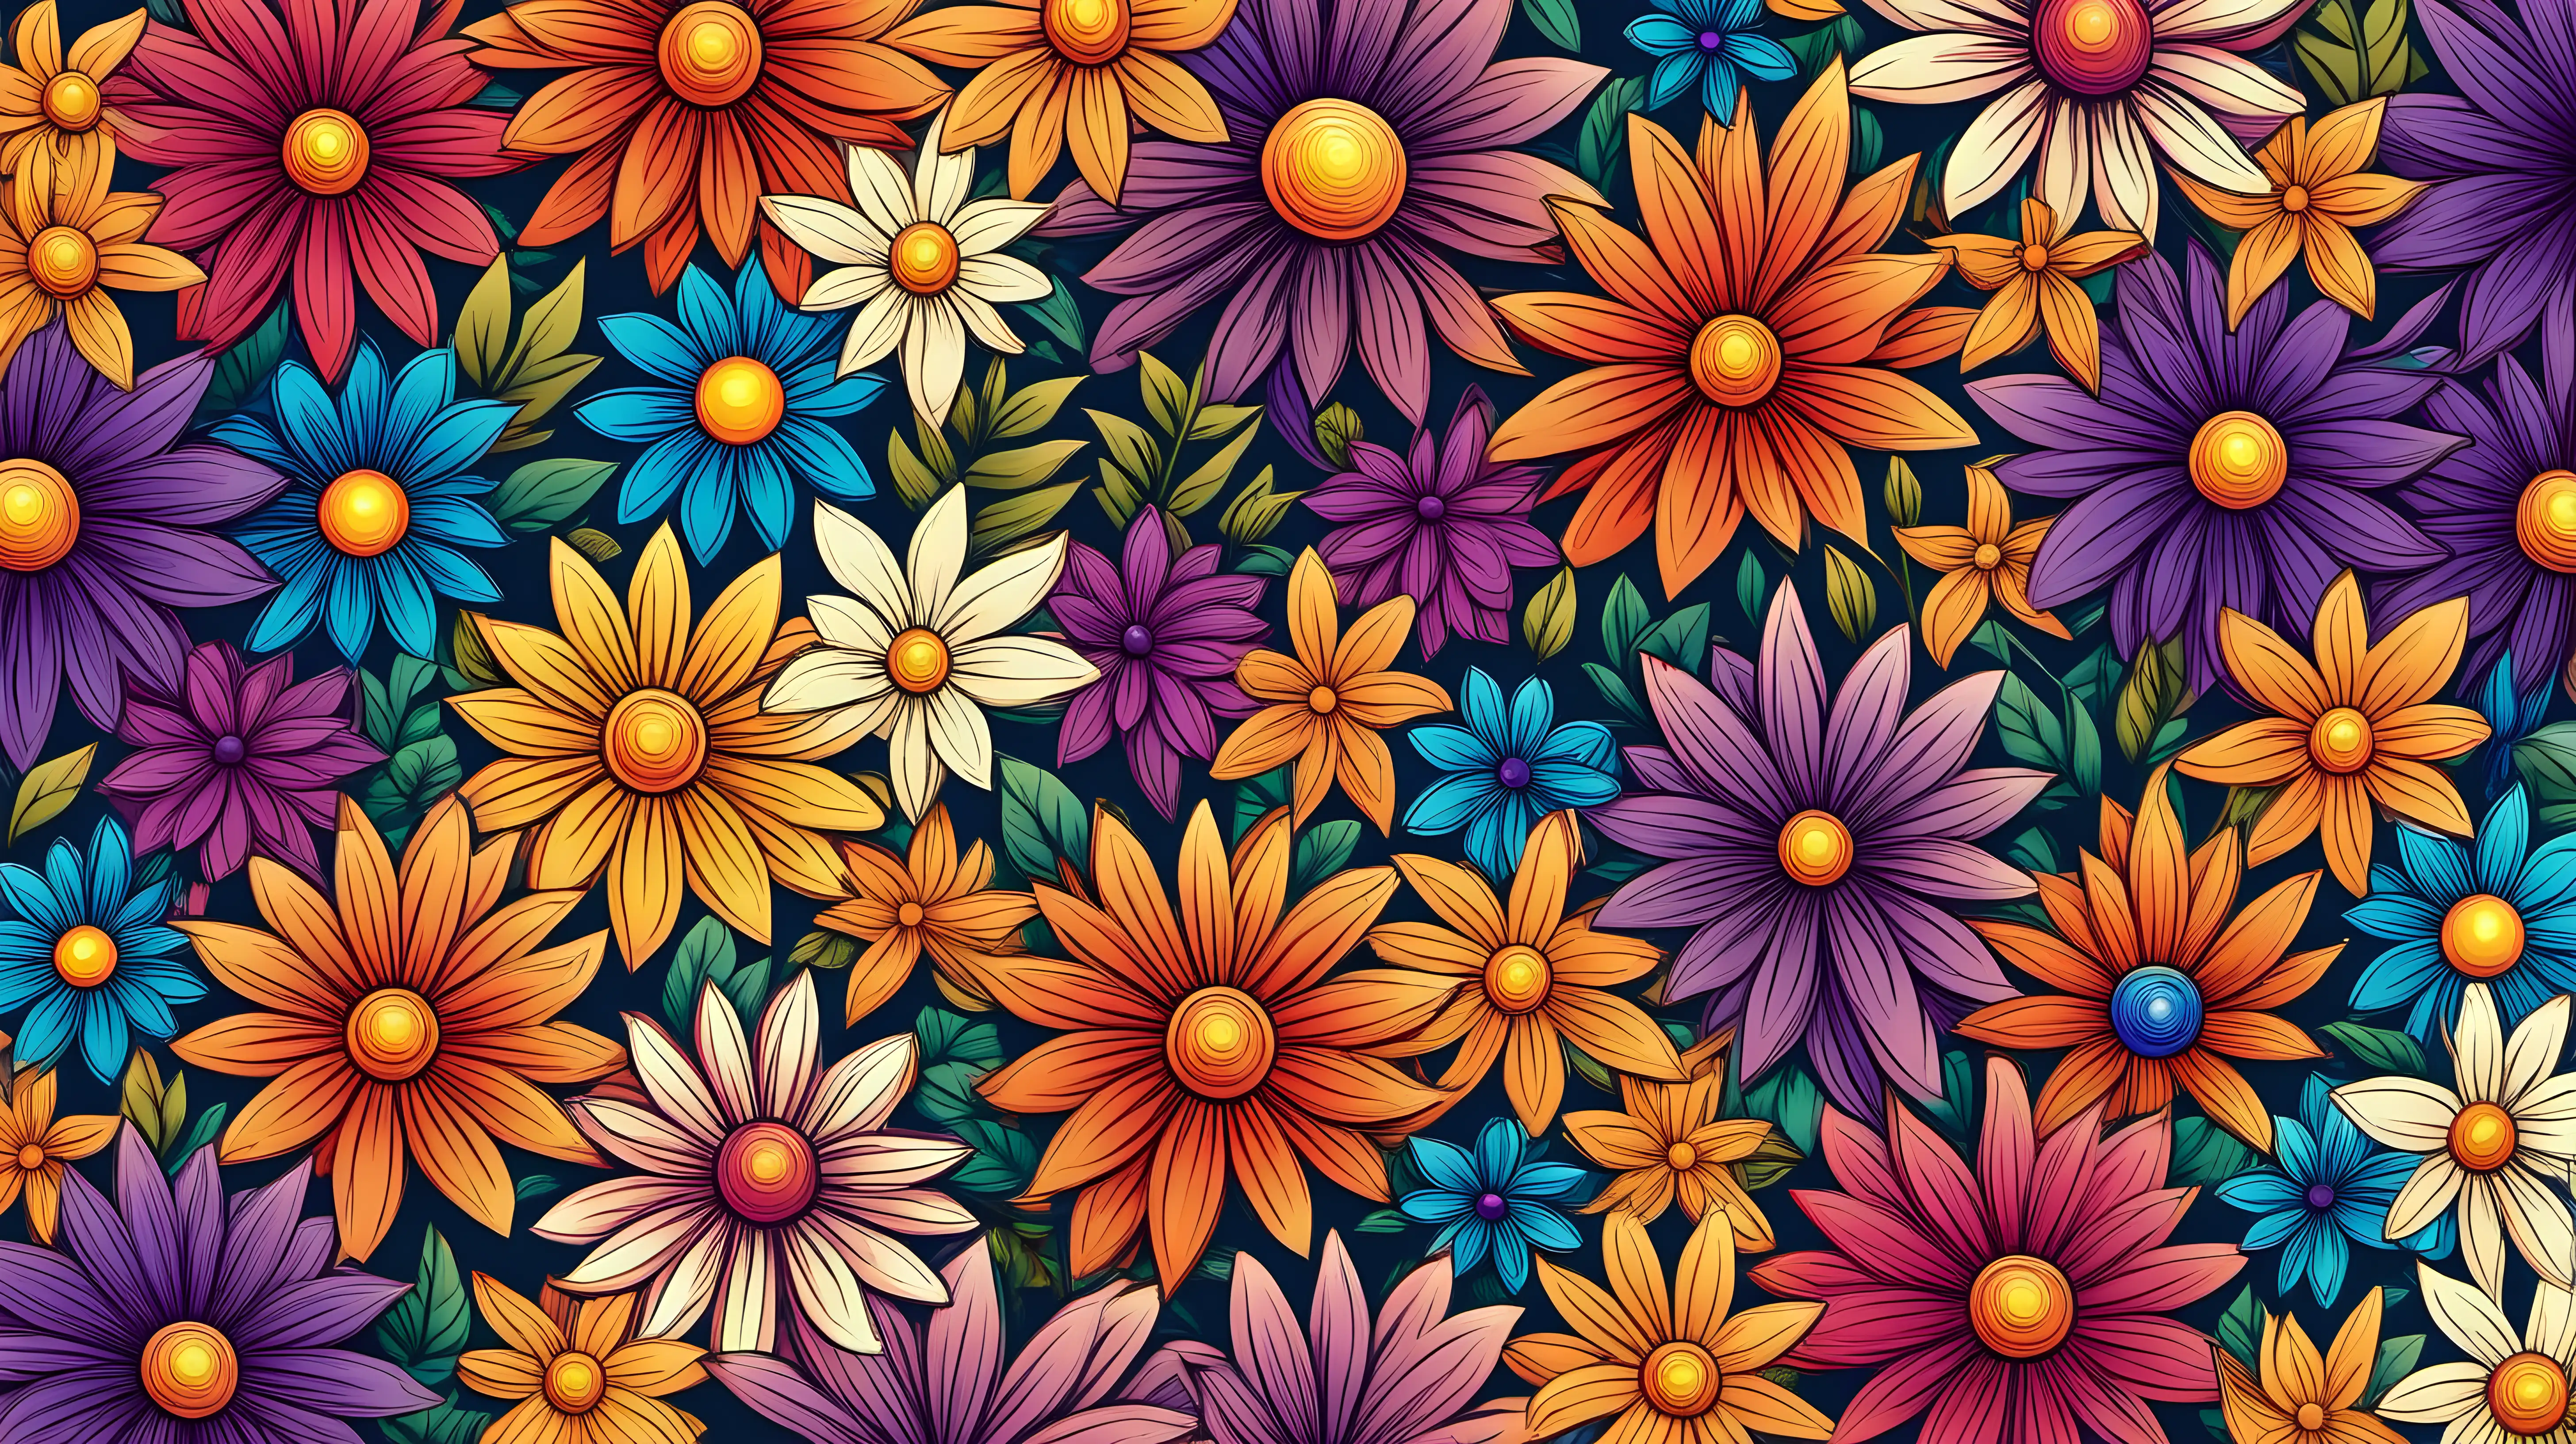 Create an colourful floral pattern image of annual flowers 